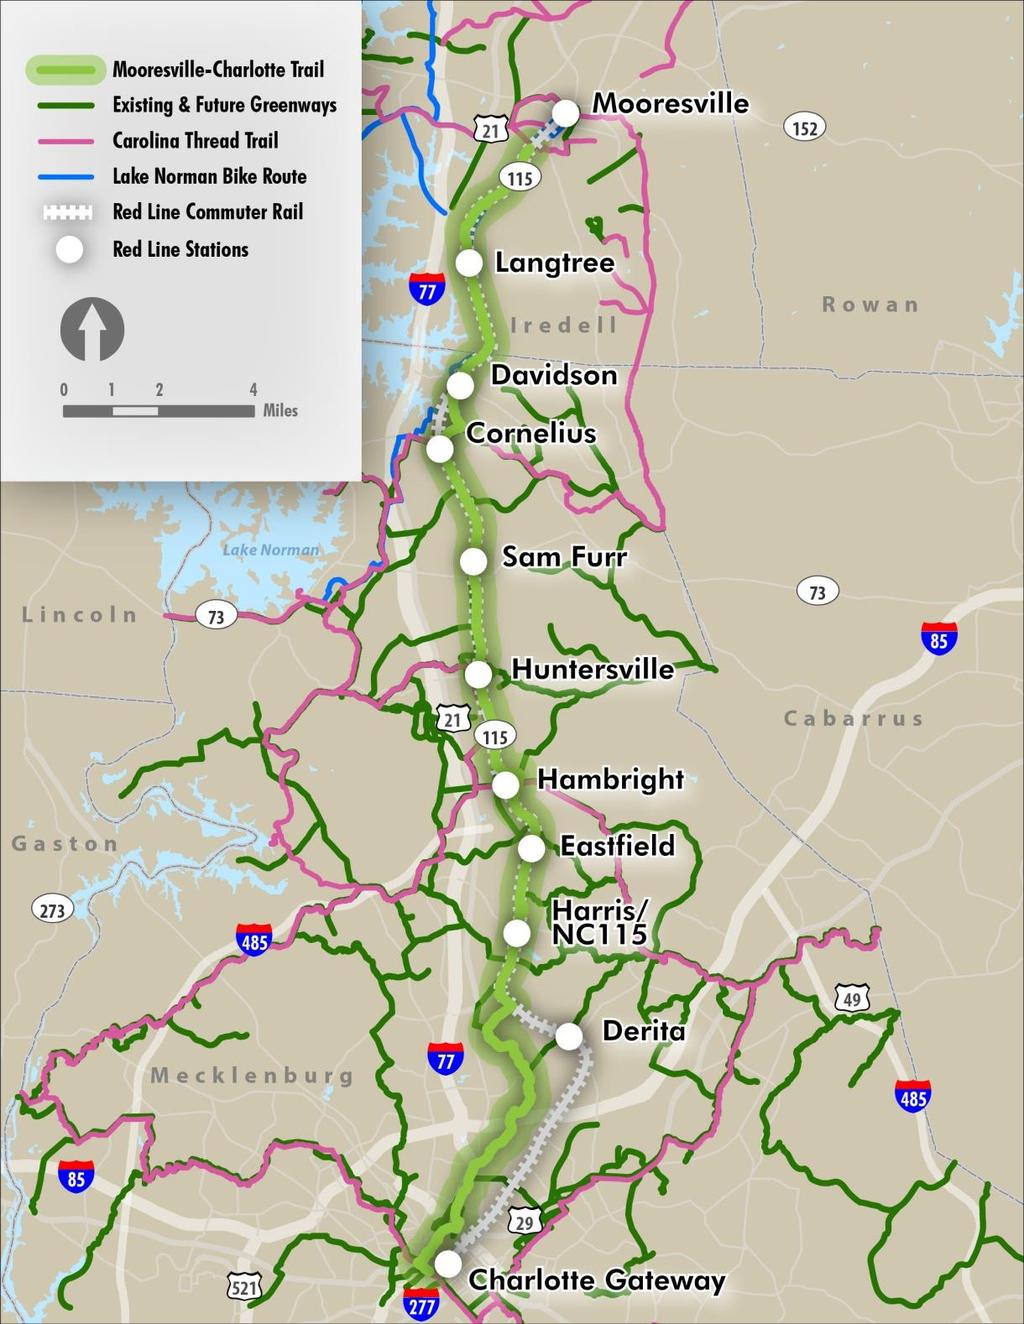 Mooresville- Charlotte Trail The master plans for the towns within Mecklenburg County And the Mecklenburg County Greenway Master Plan do not provide a north-south corridor for off road bicycle and